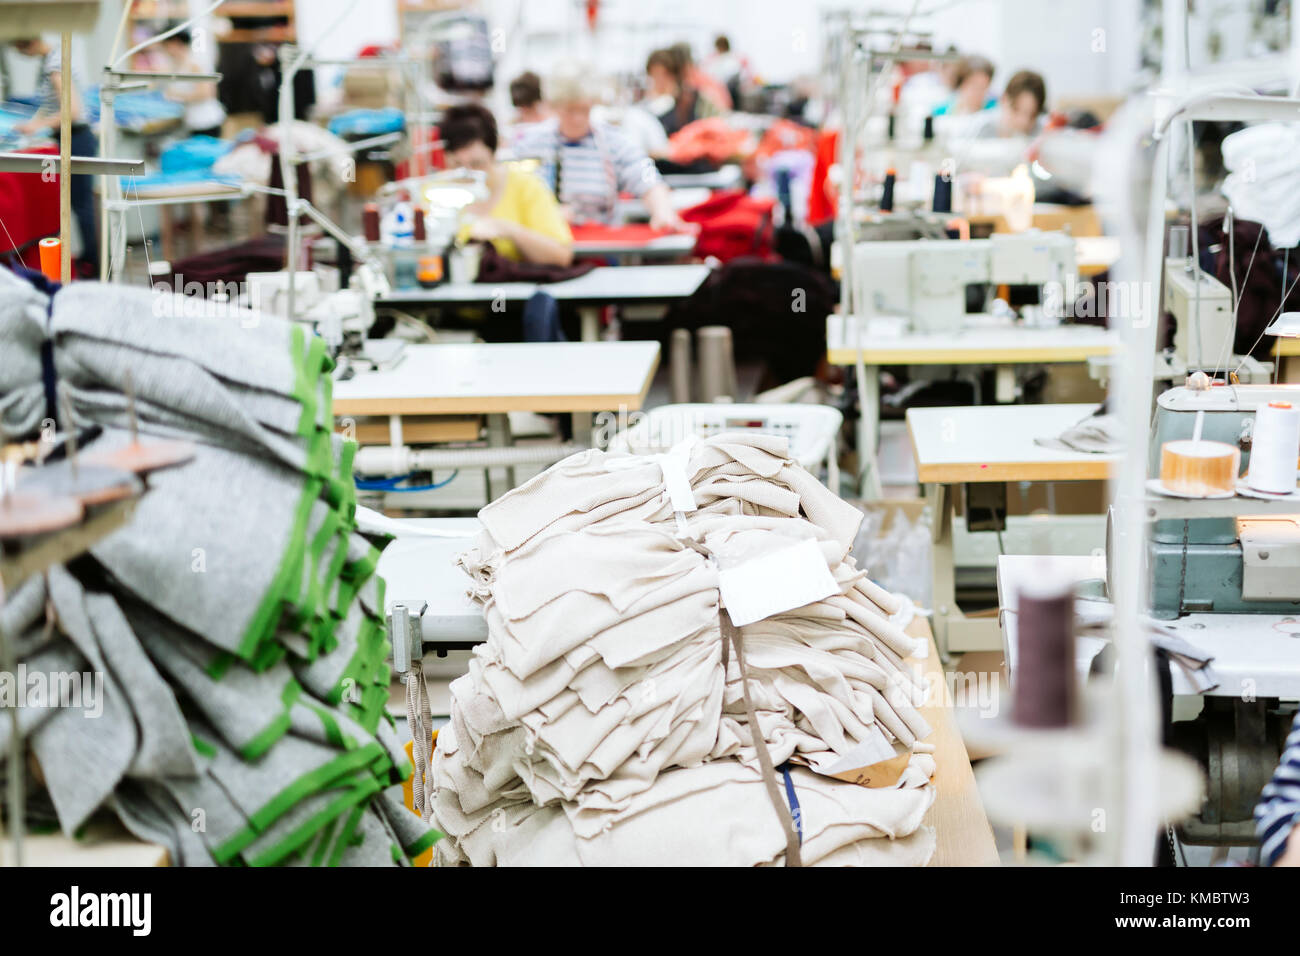 Sewing industry manufacturing Stock Photo